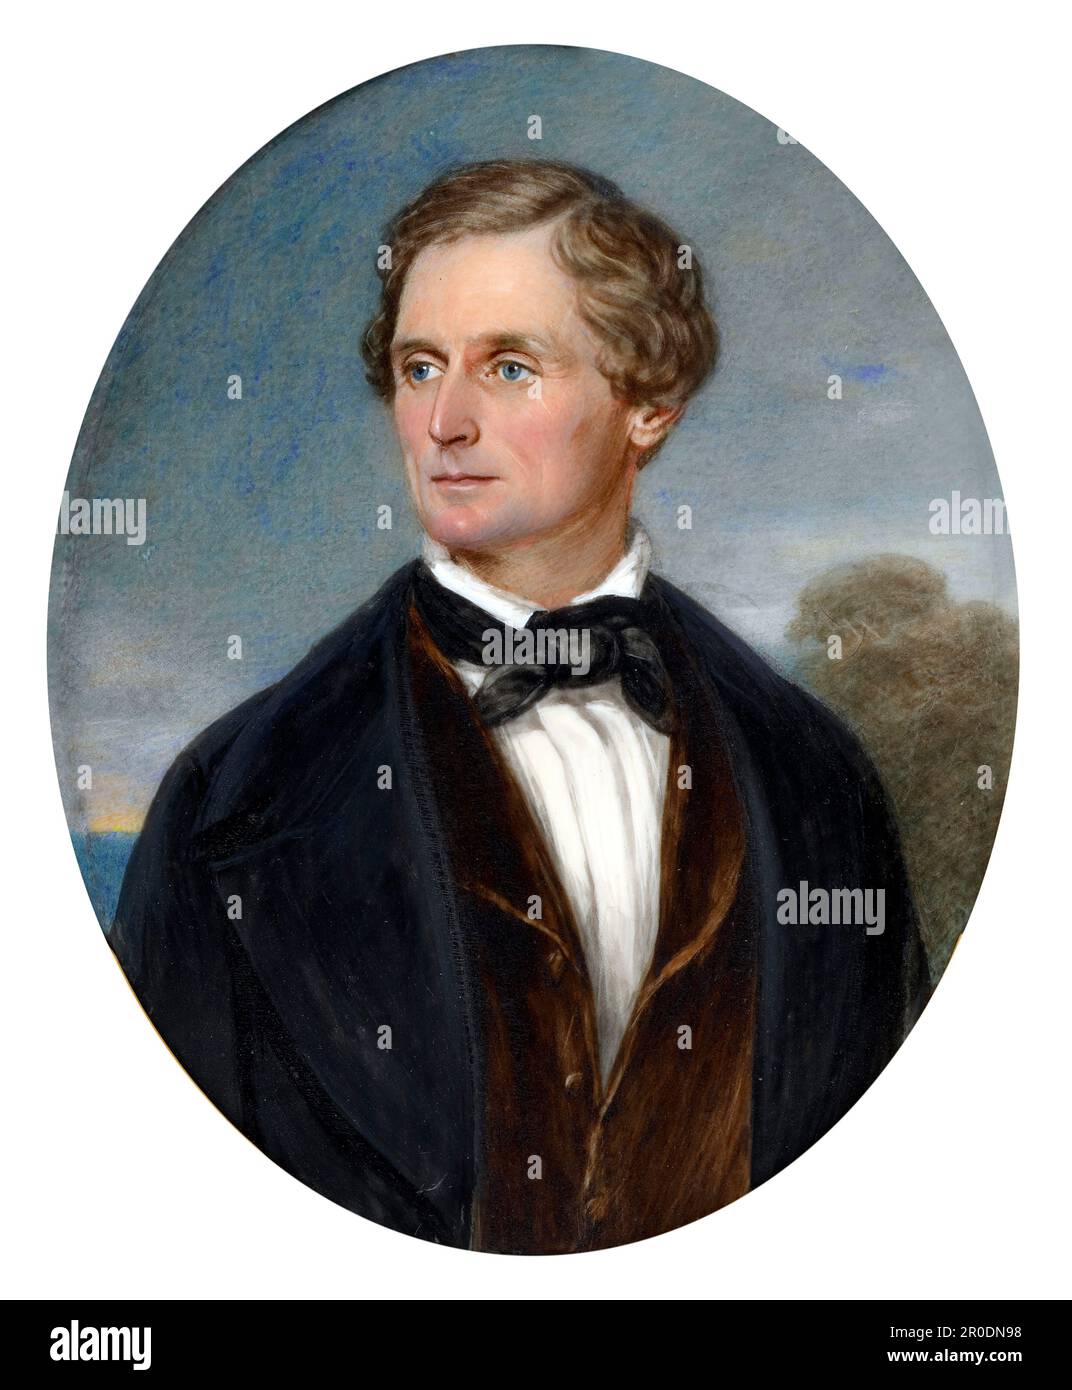 Jefferson Davis. Portrait of the American politician who served as the first and only President of the Confederat States, Jefferson F. Davis (1808-1889) by George Lethbridge Saunders,  watercolor on ivory, 1849 Stock Photo